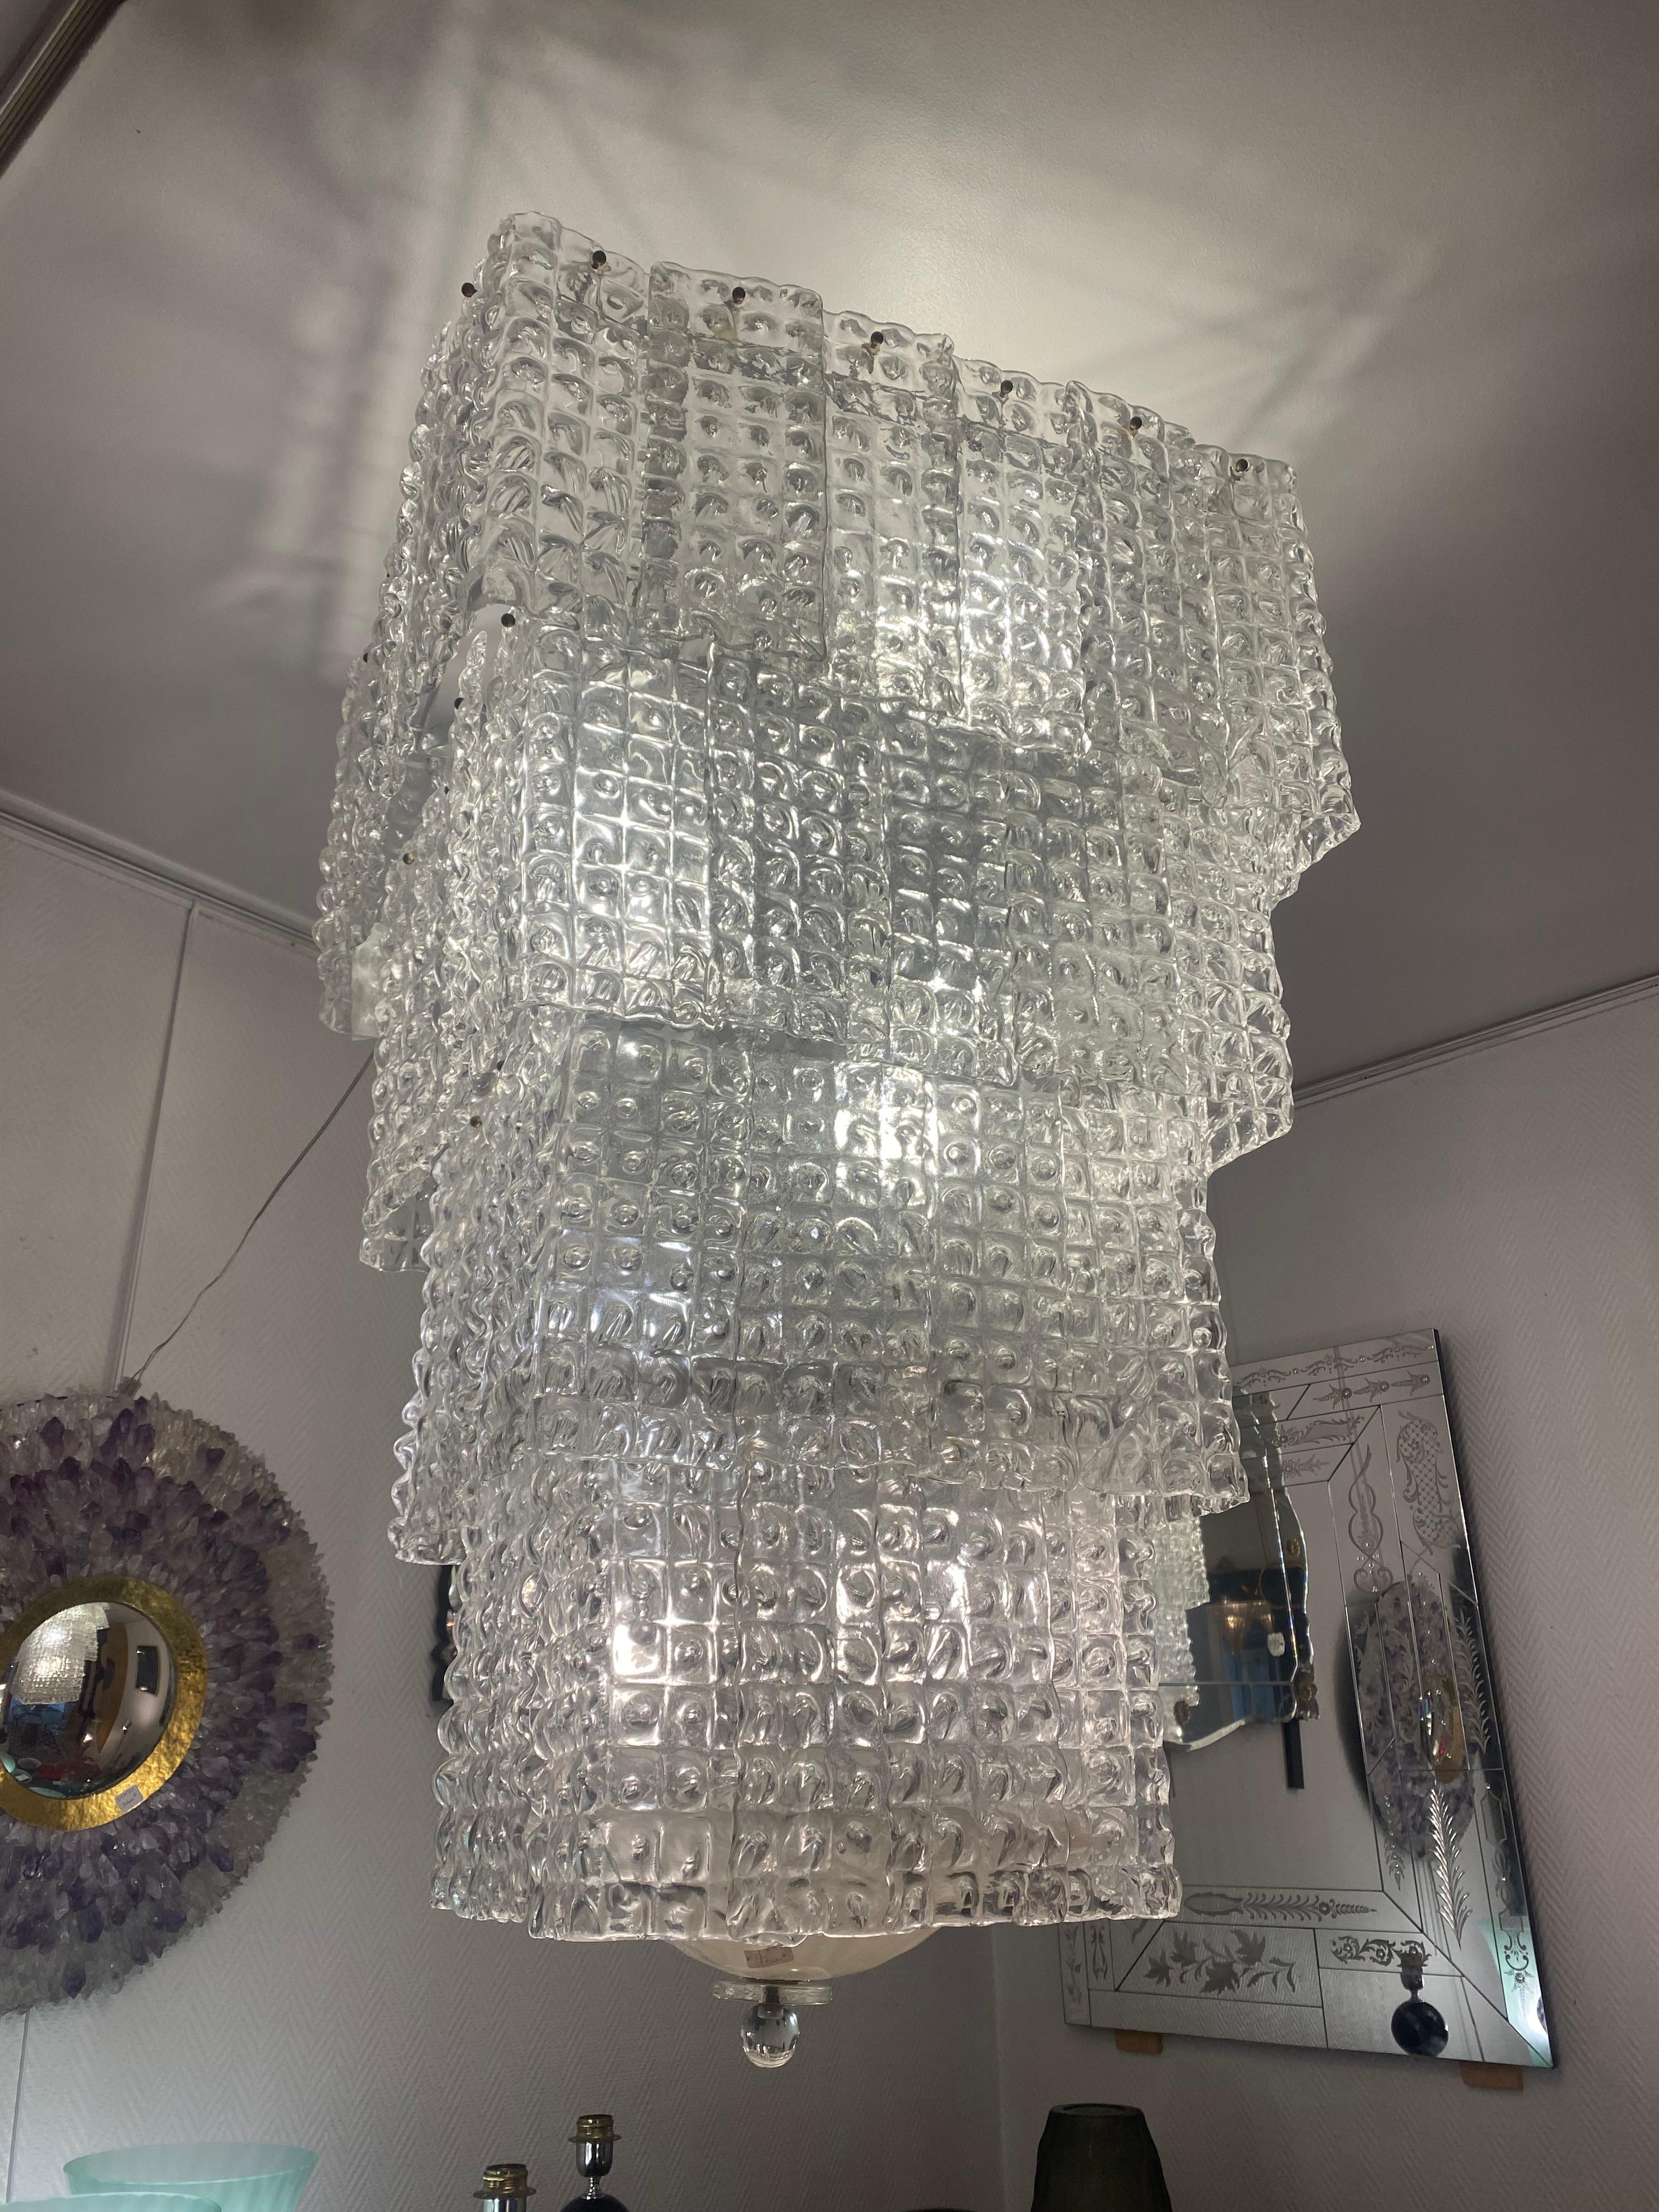 Murano glass chandelier - Circa 1970
Four cascading levels / small square glass plates
Dimensions: H 120 x 40,50,60,70cm
In excellent condition.